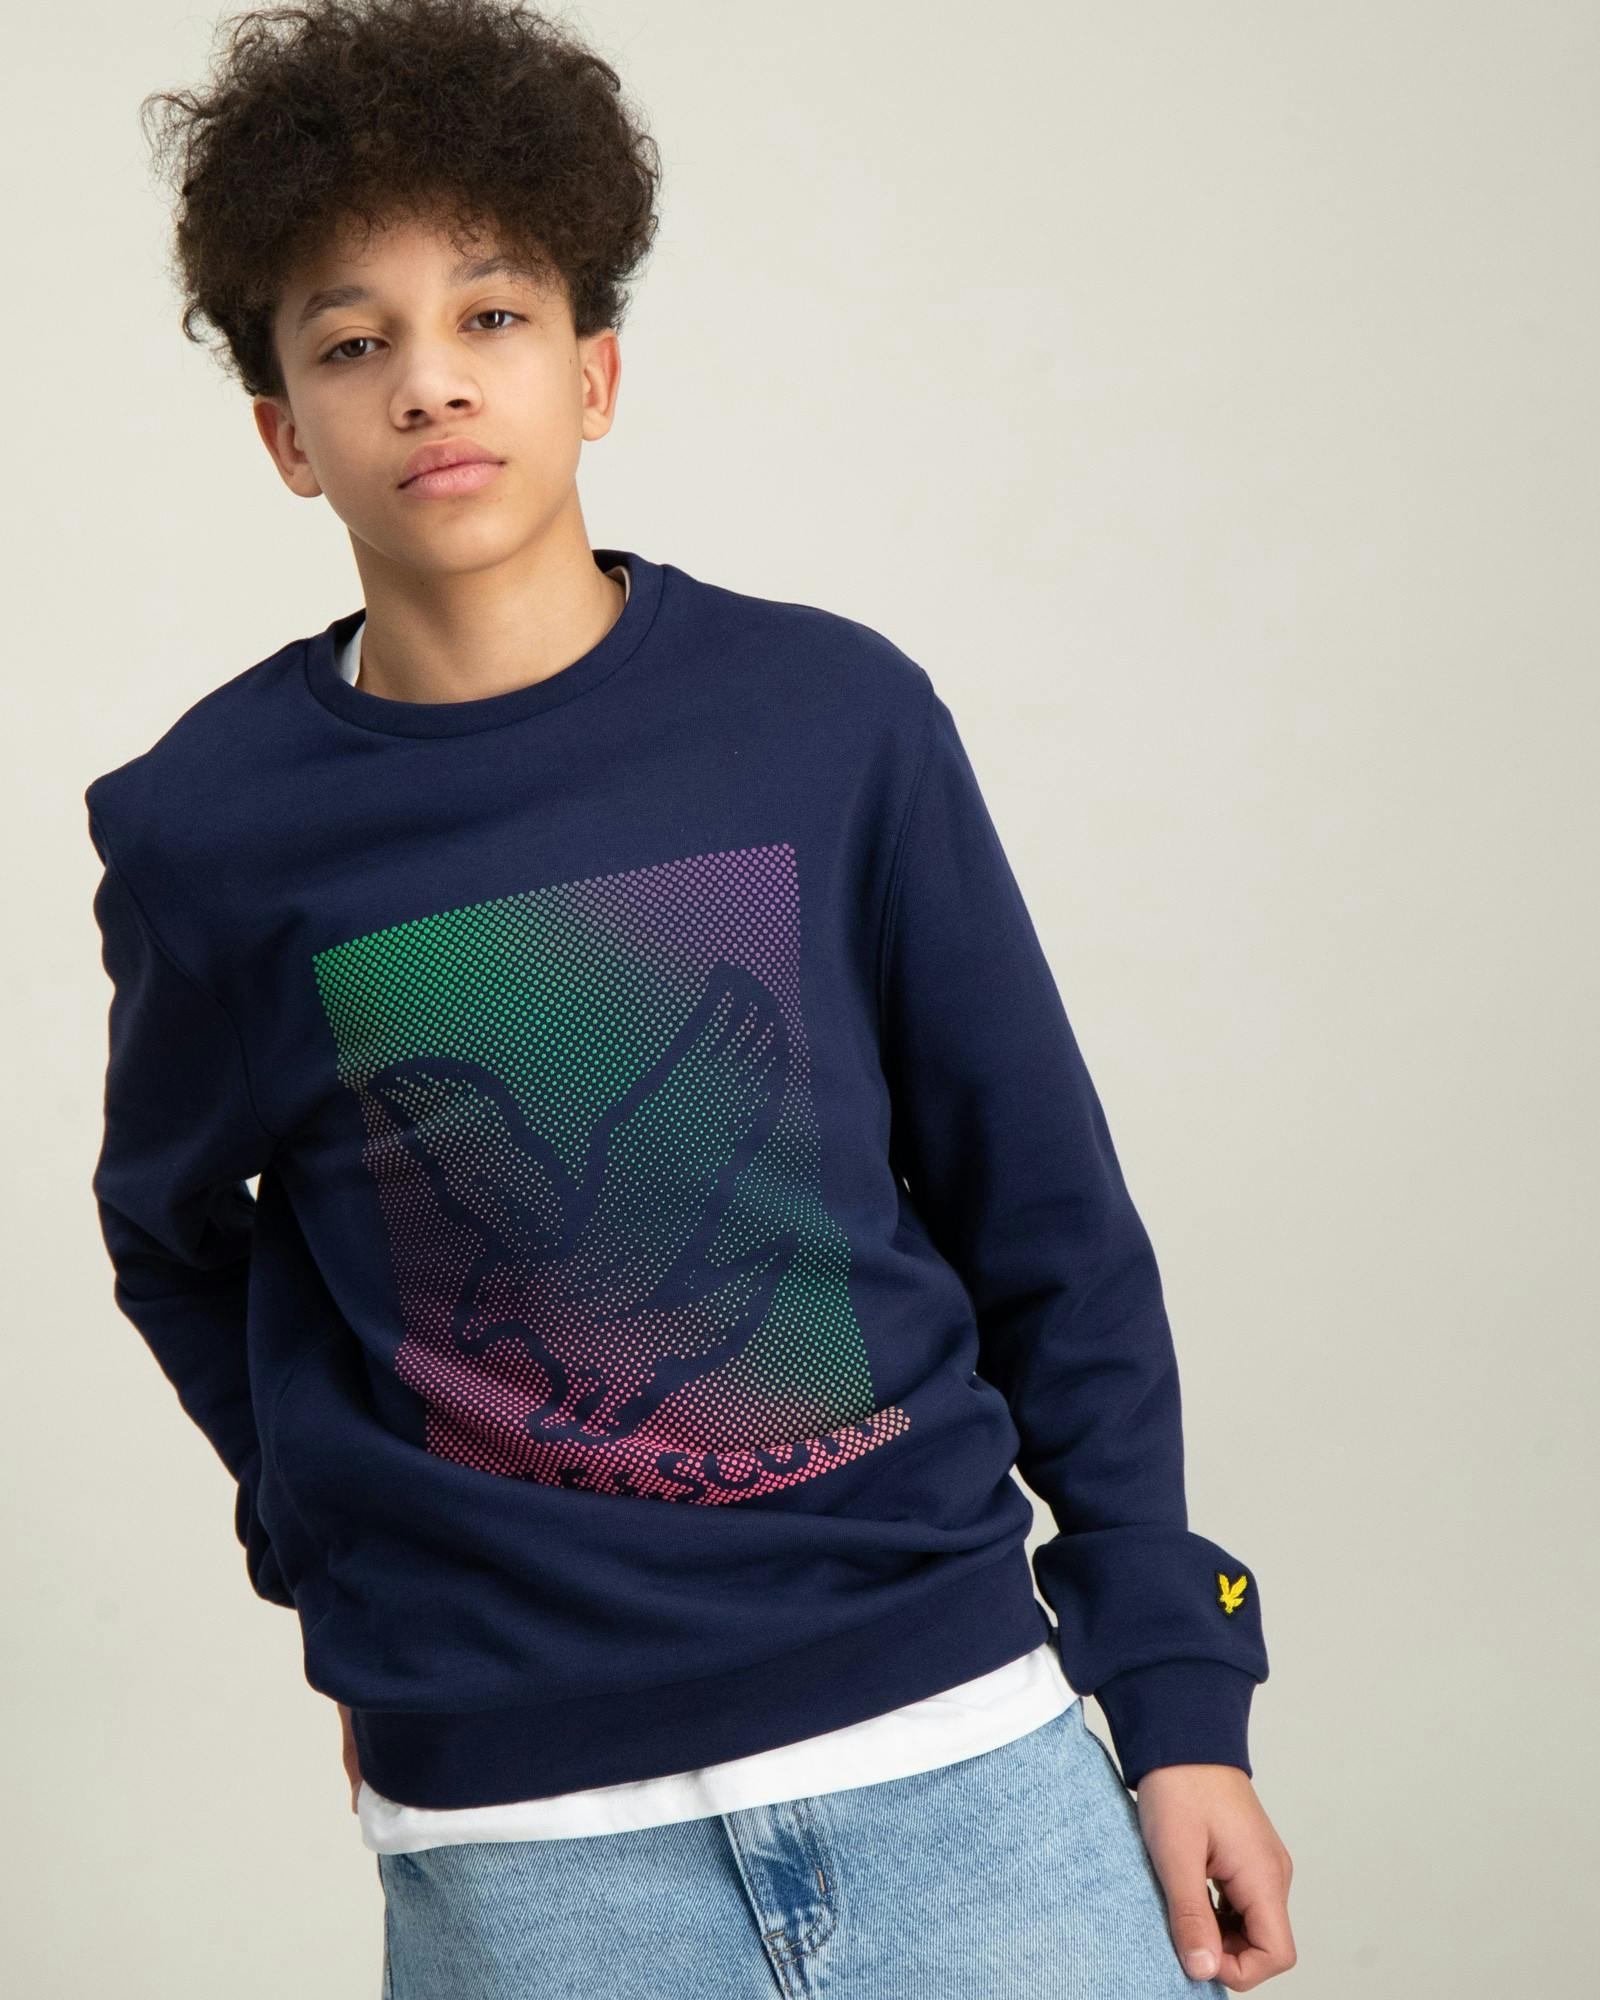 Dotted Eagle Graphic Sweatshirt